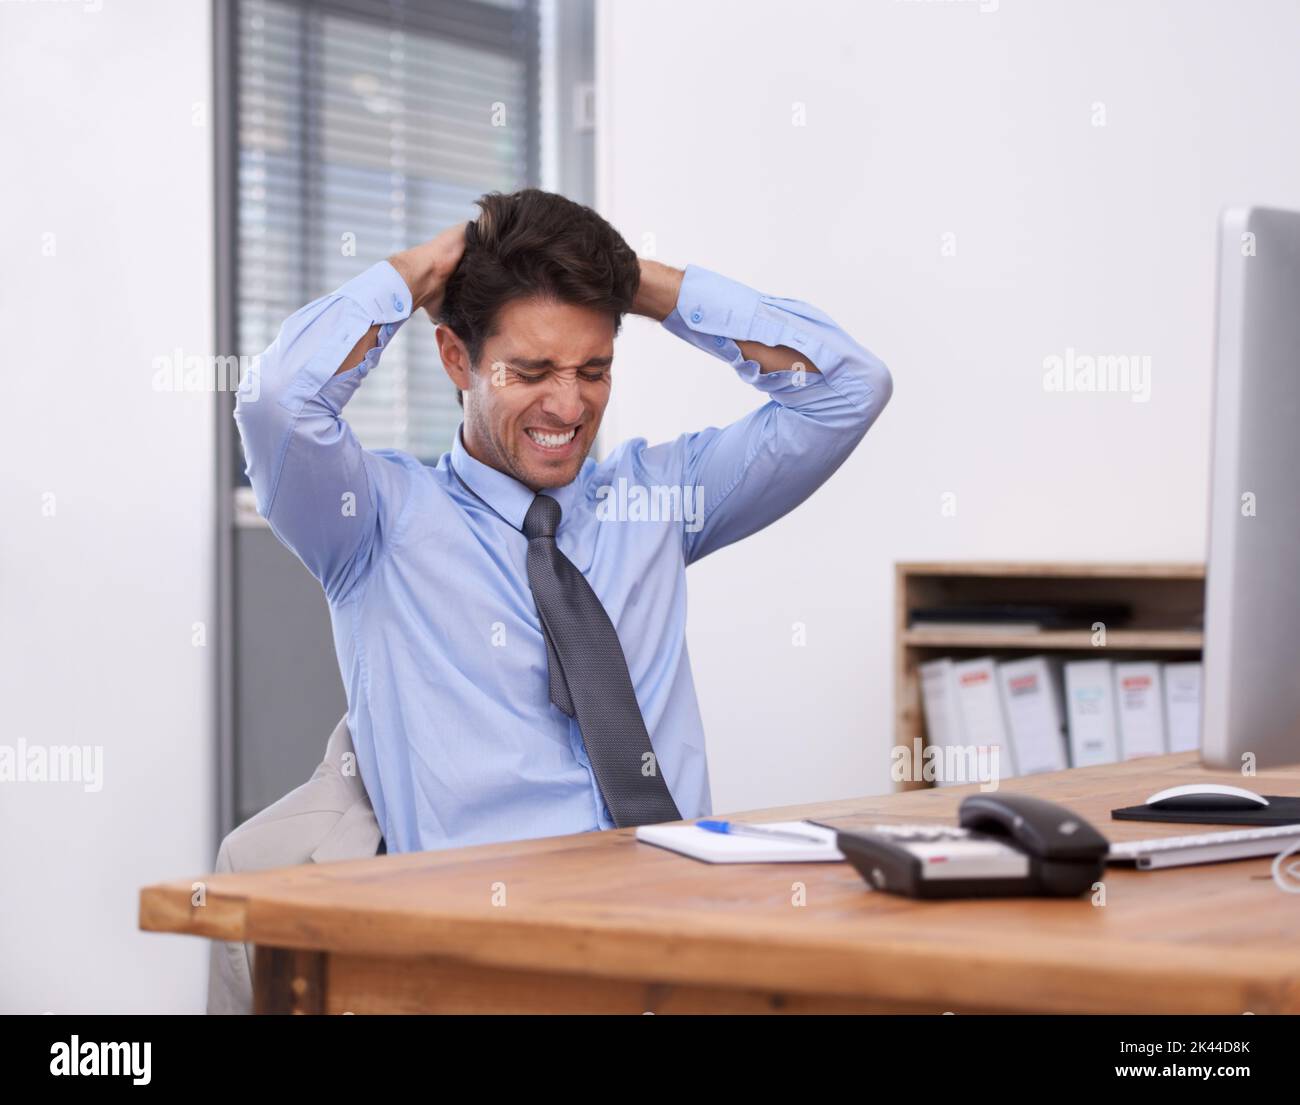 Aah, I cant this anymore. A stressed out businessman sitting at his desk and looking frustrated. Stock Photo